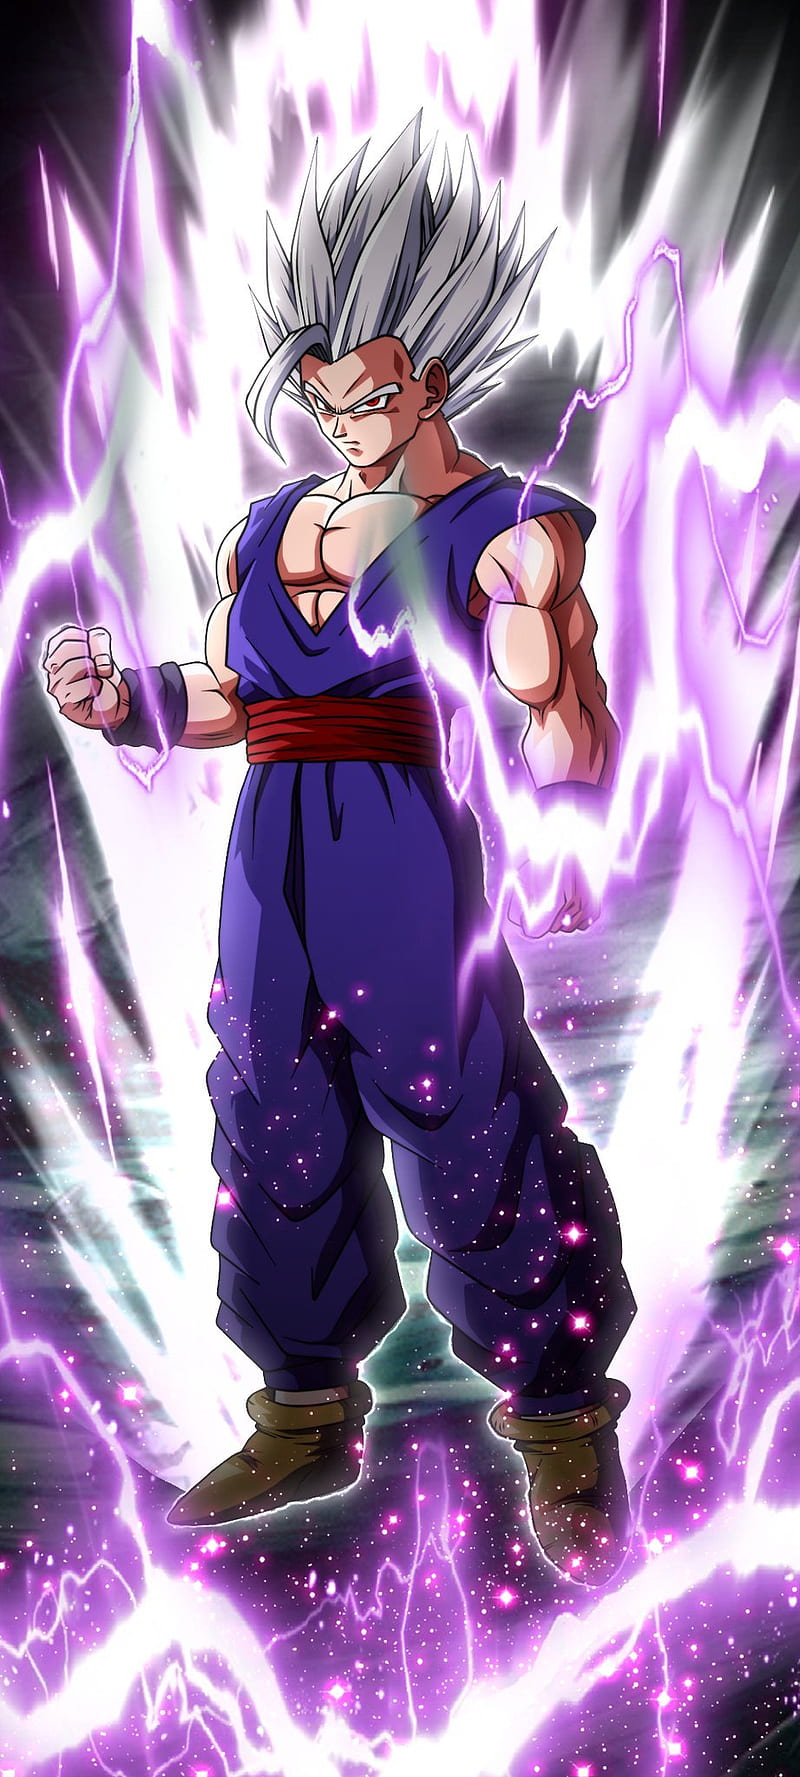 Gohan Beast Form wallpaper by TheSpawner97  Download on ZEDGE  aa53